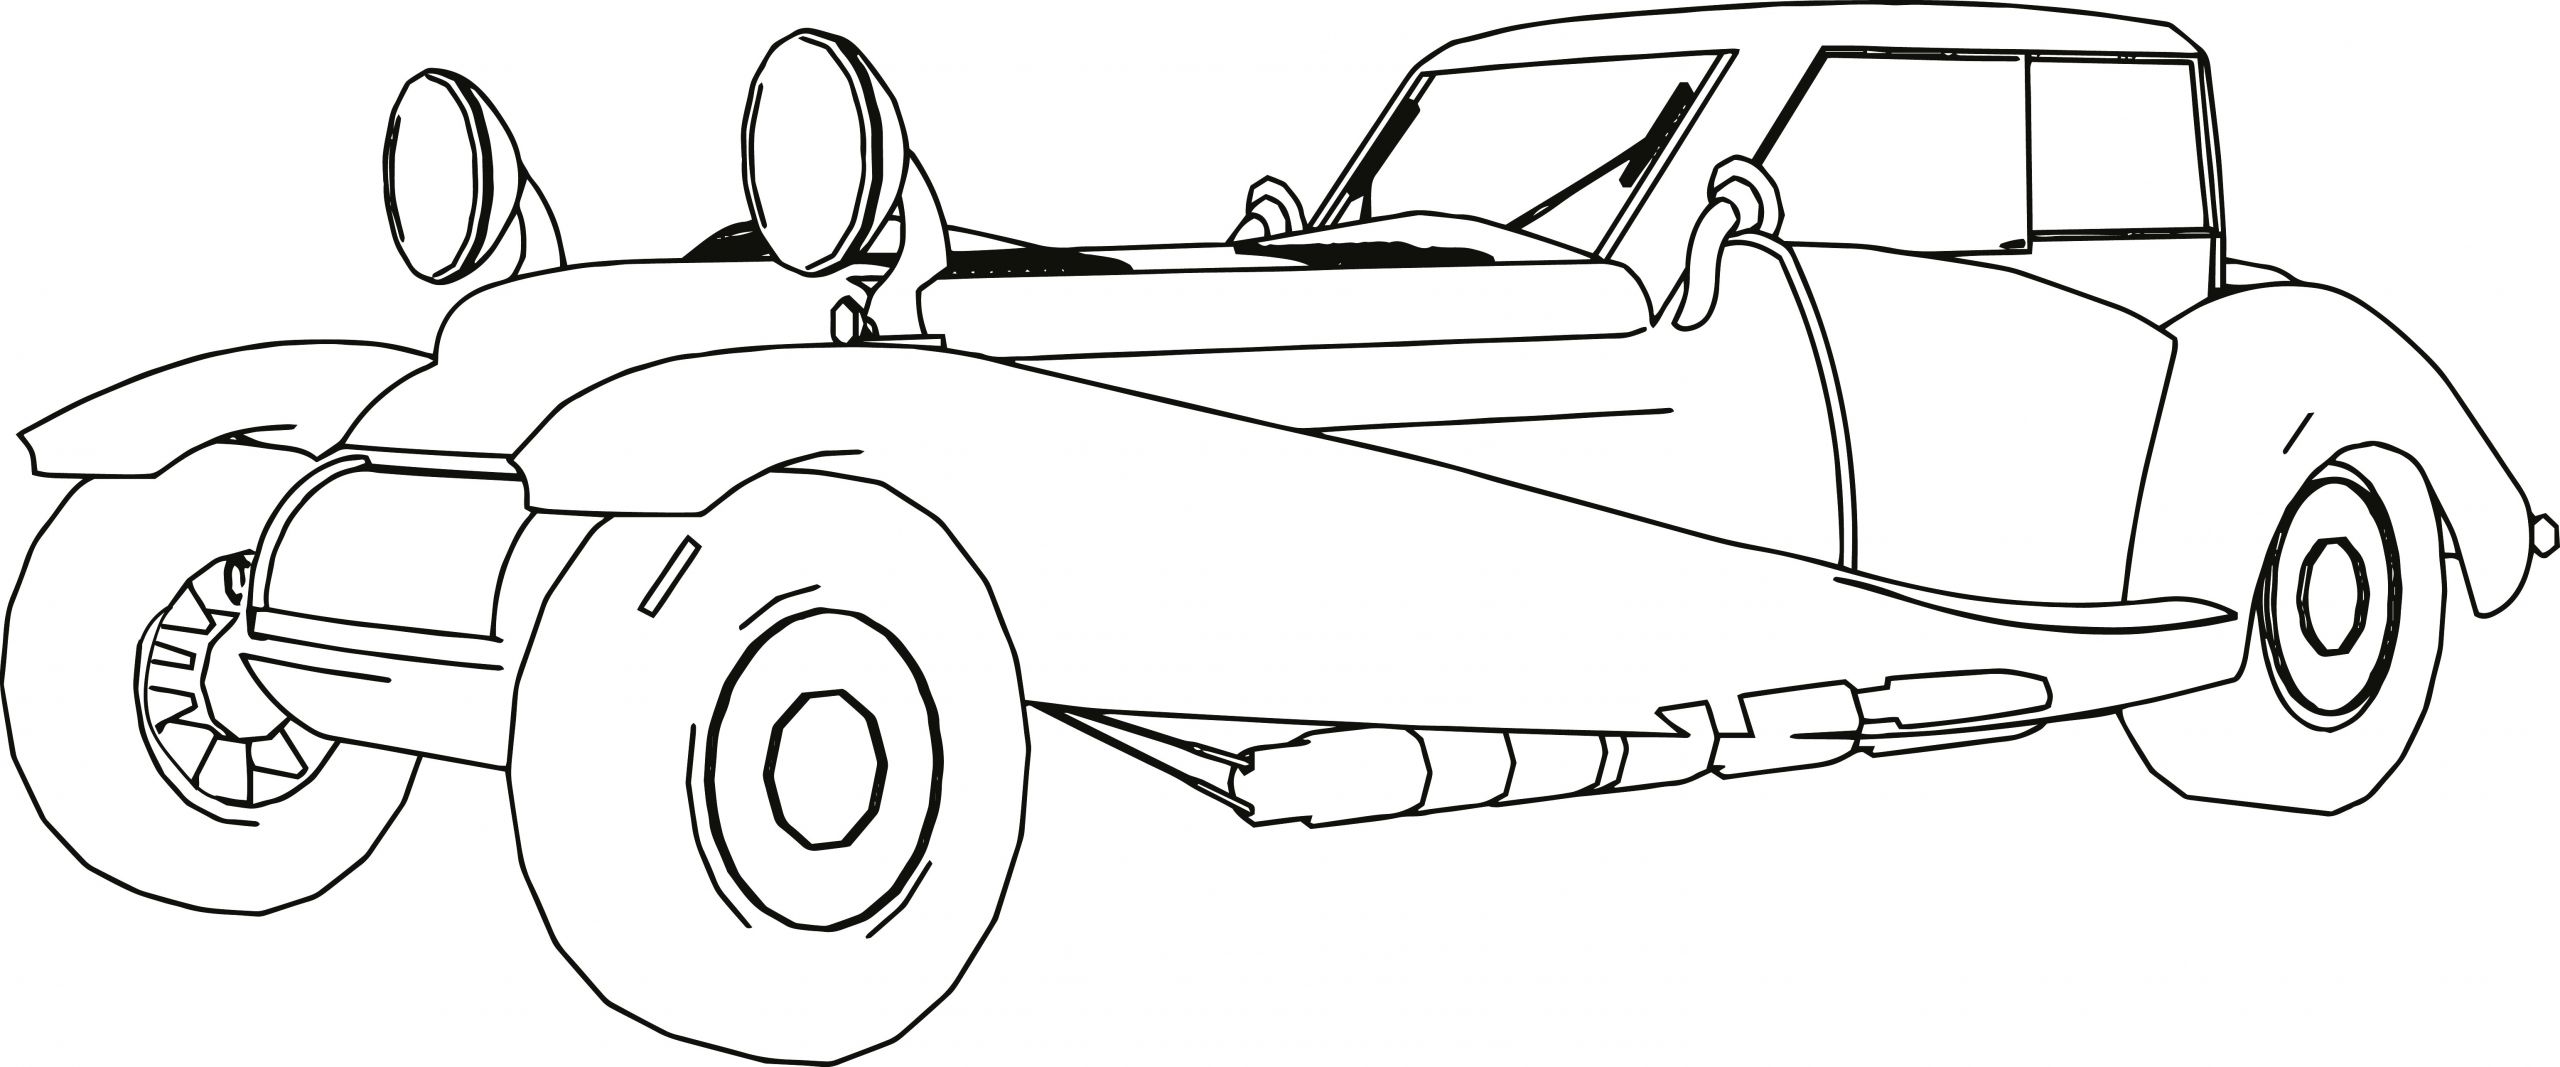 car coloring page to print luxury collection car color pages coloring pages of car coloring page to print jpg